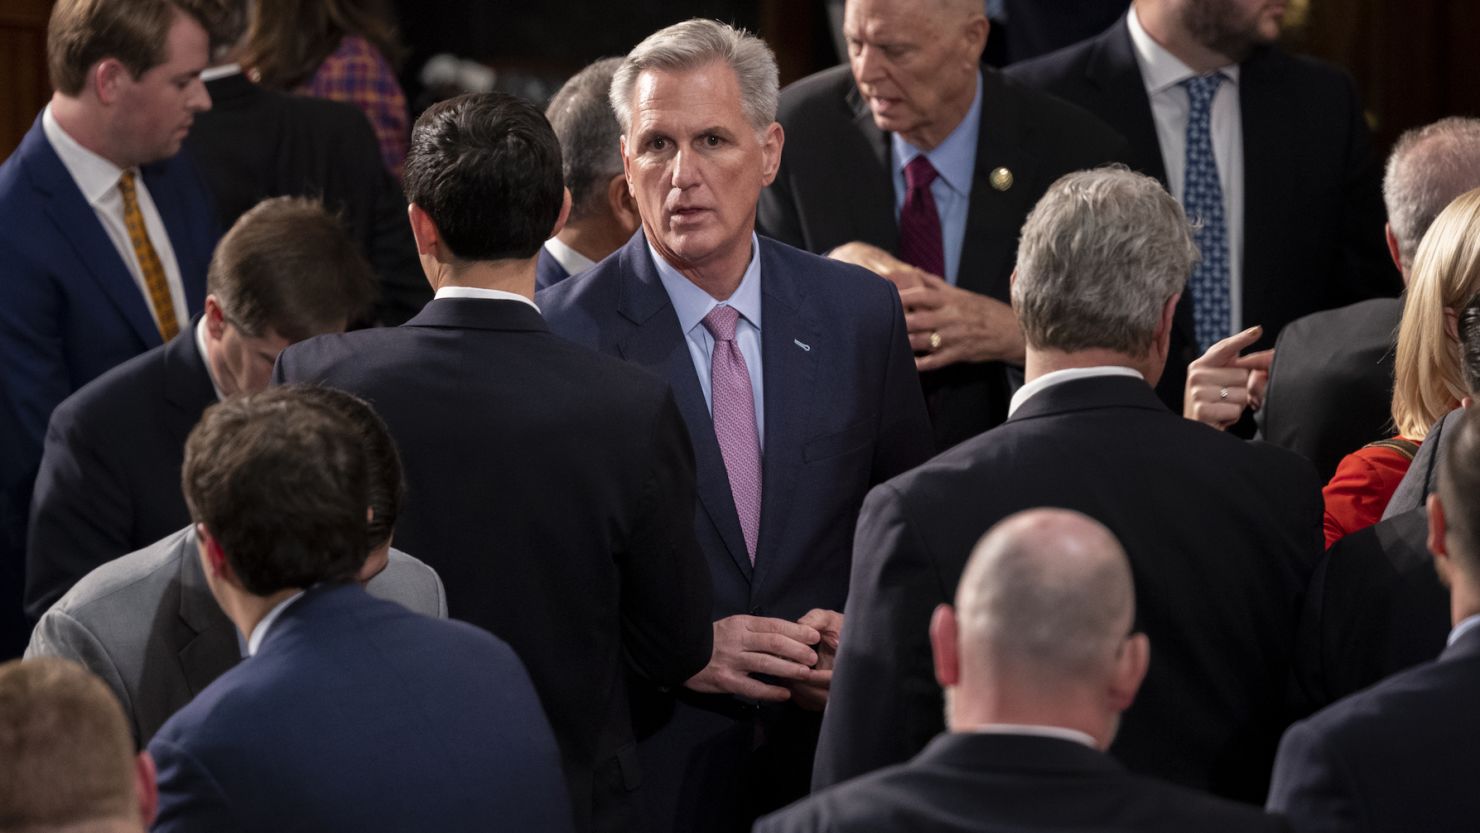 House GOP leader Kevin McCarthy is seen with other Republicans during the speakership vote on the chamber floor at the US Capitol in Washington, DC, on January 6, 2023.